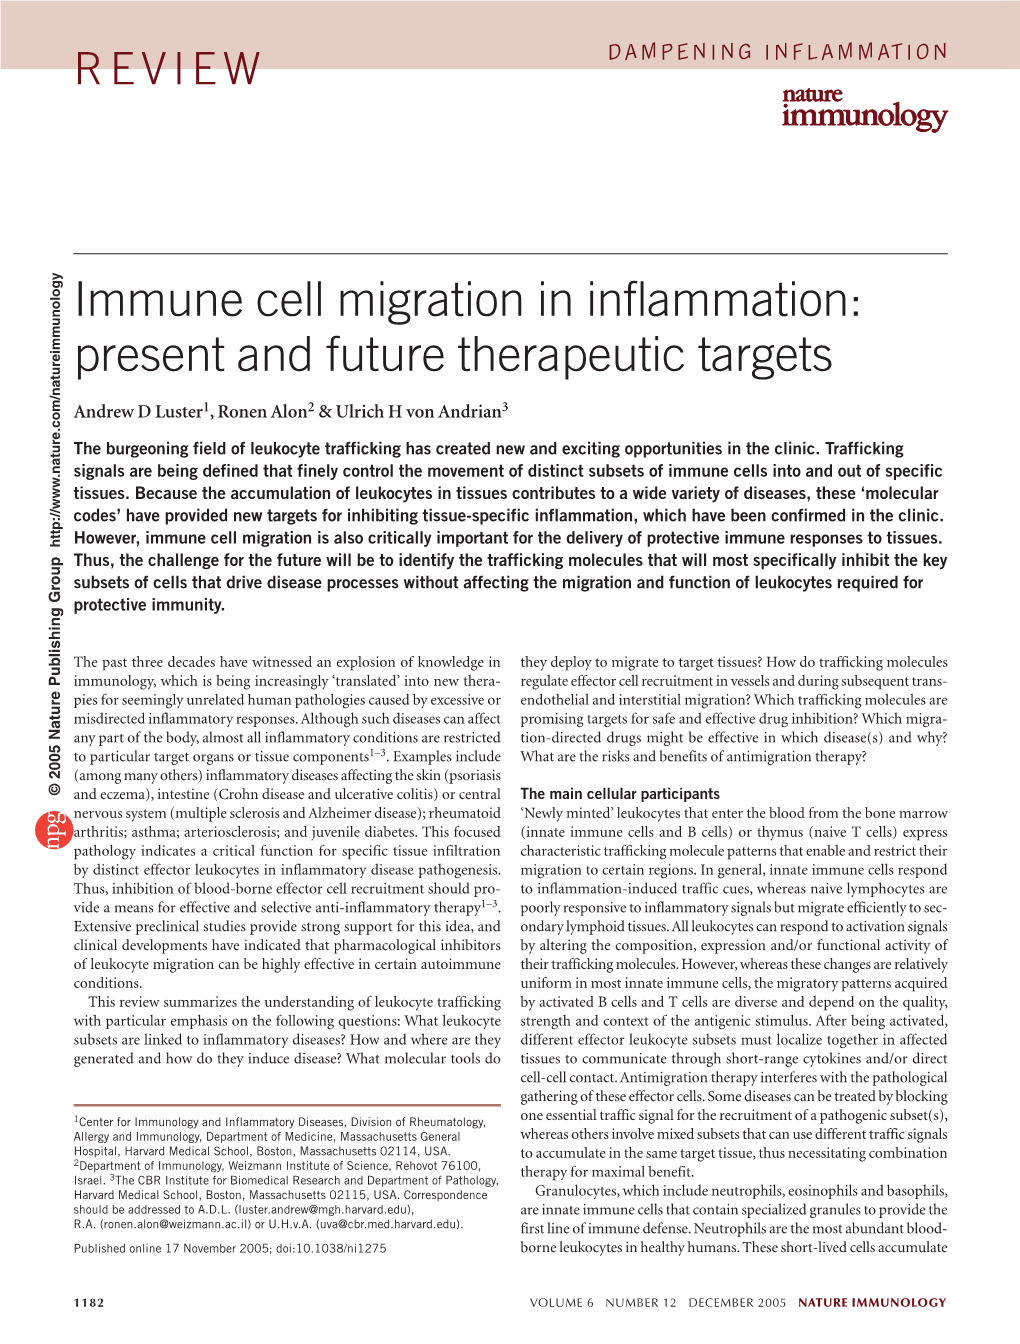 Immune Cell Migration in Inflammation: Present and Future Therapeutic Targets